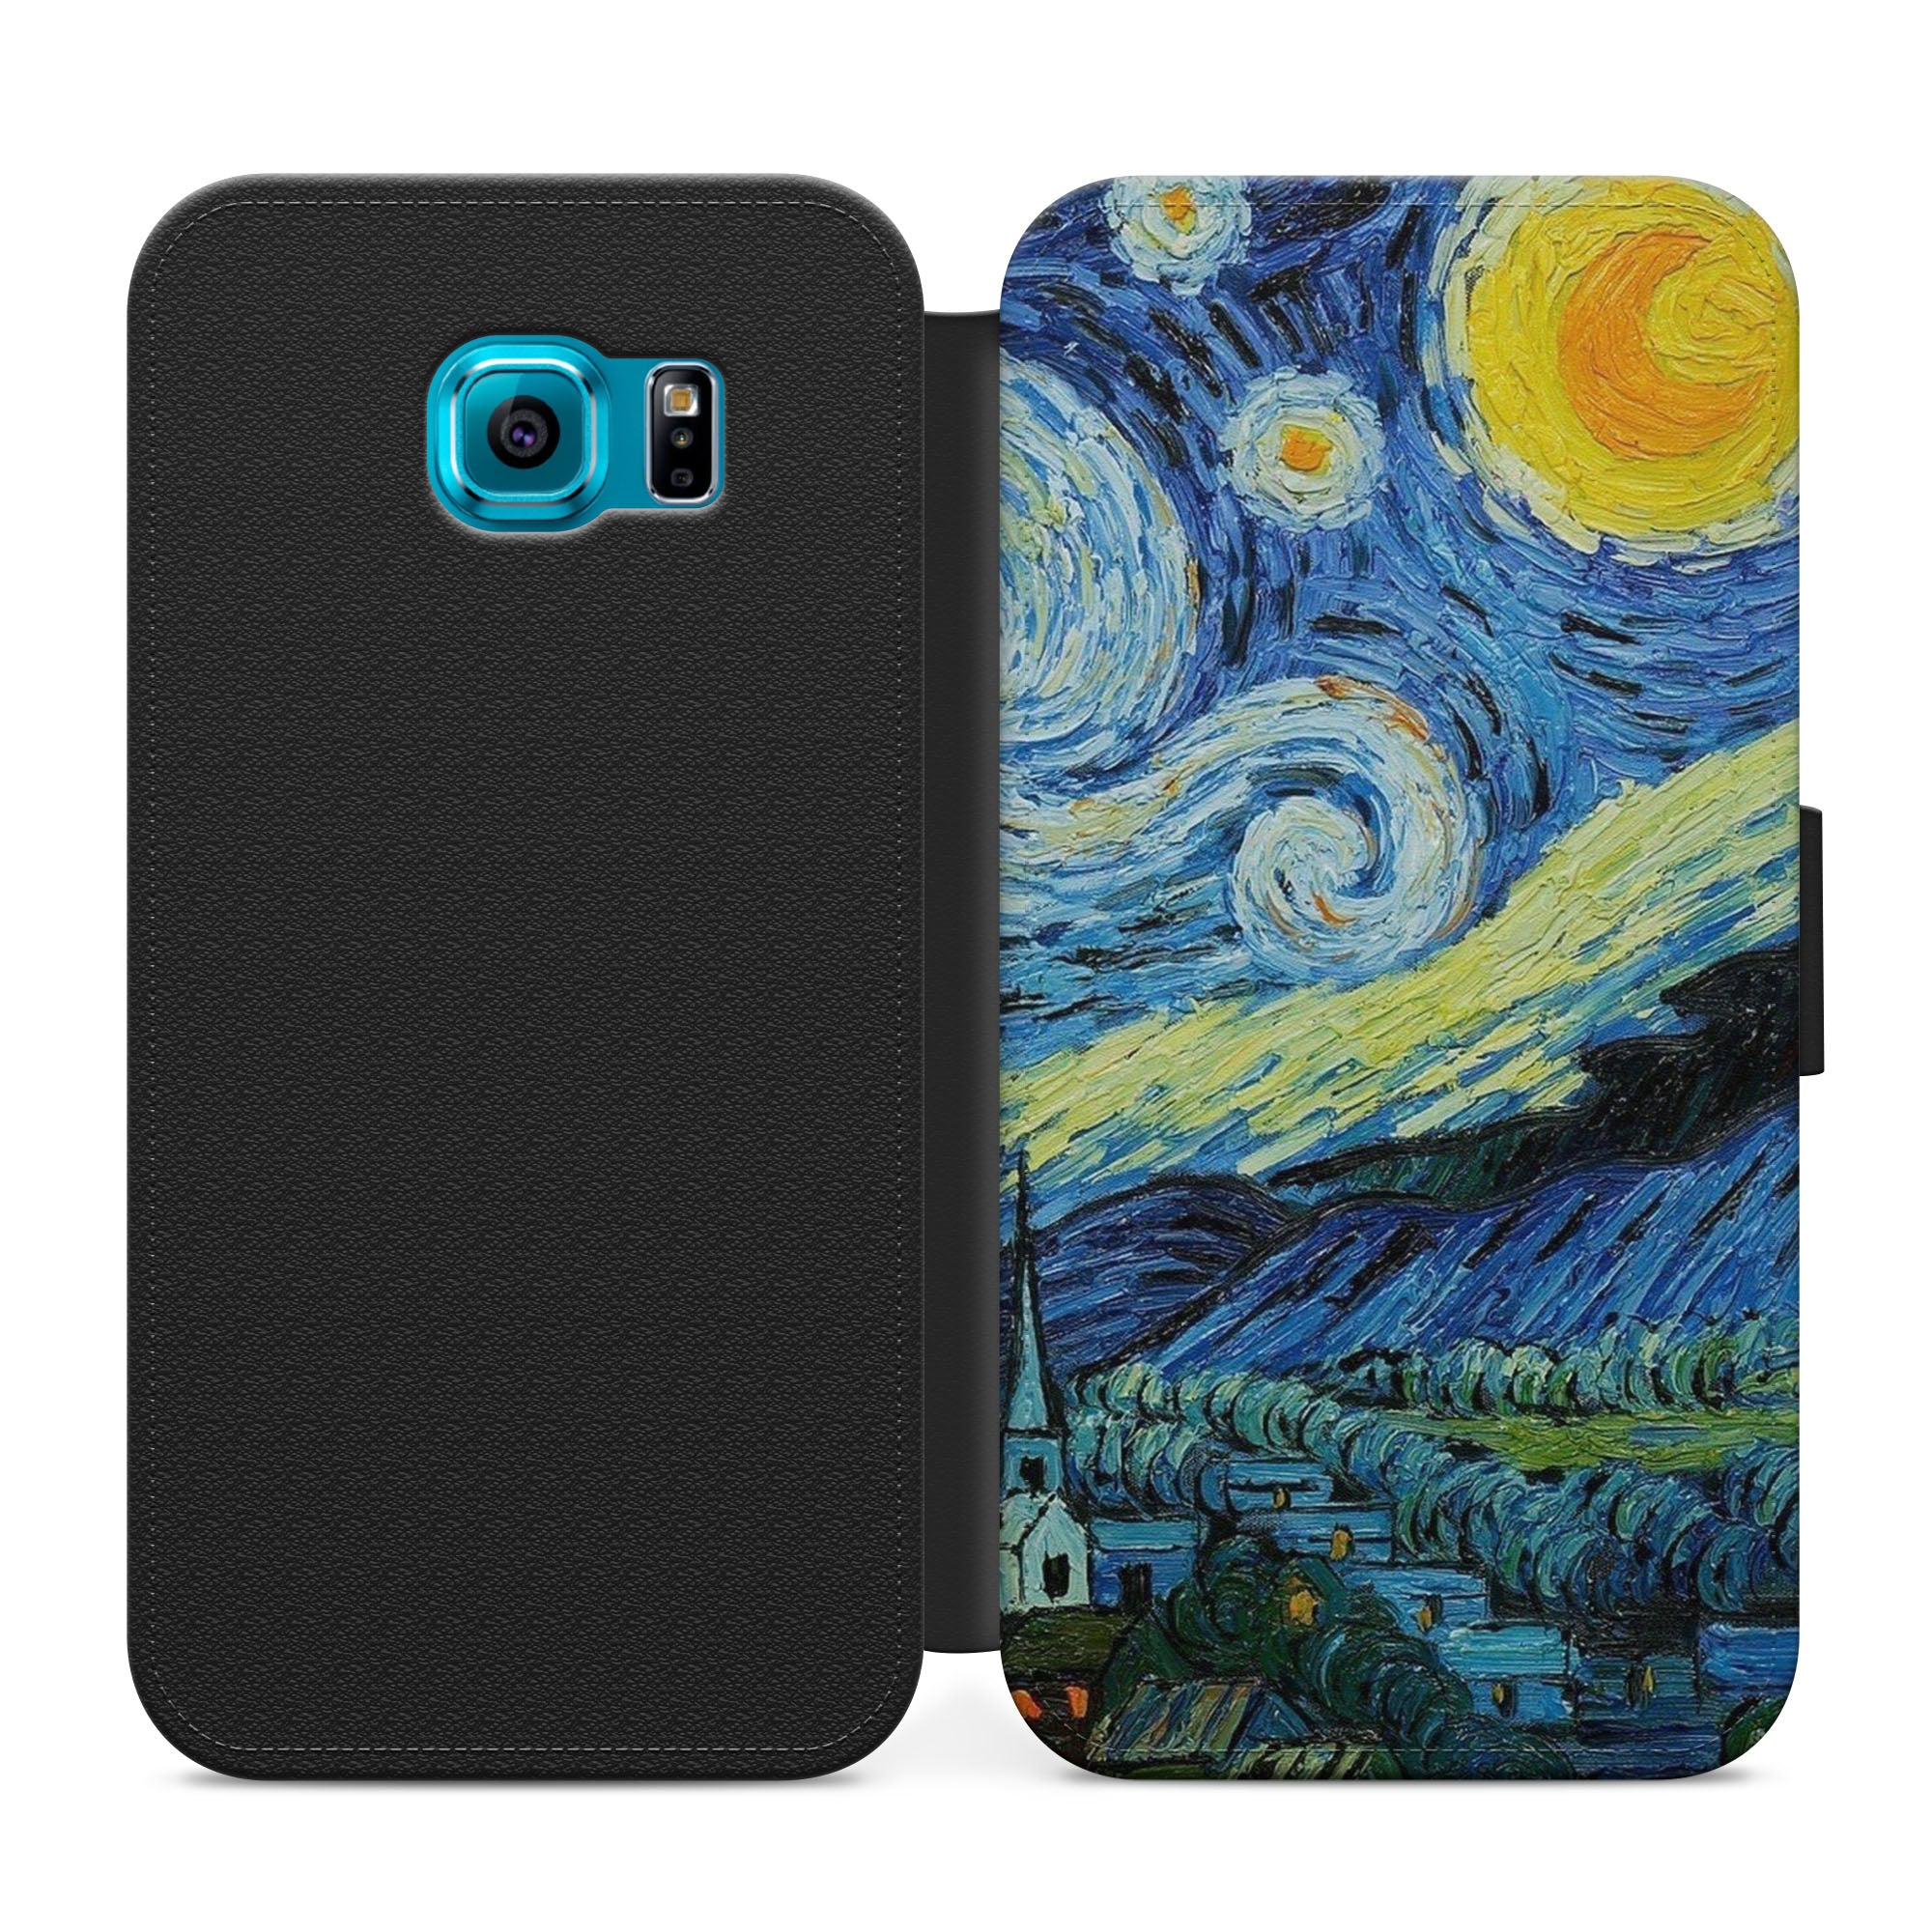 Van Gogh Starry Night Faux Leather Flip Case Wallet for iPhone / Samsung